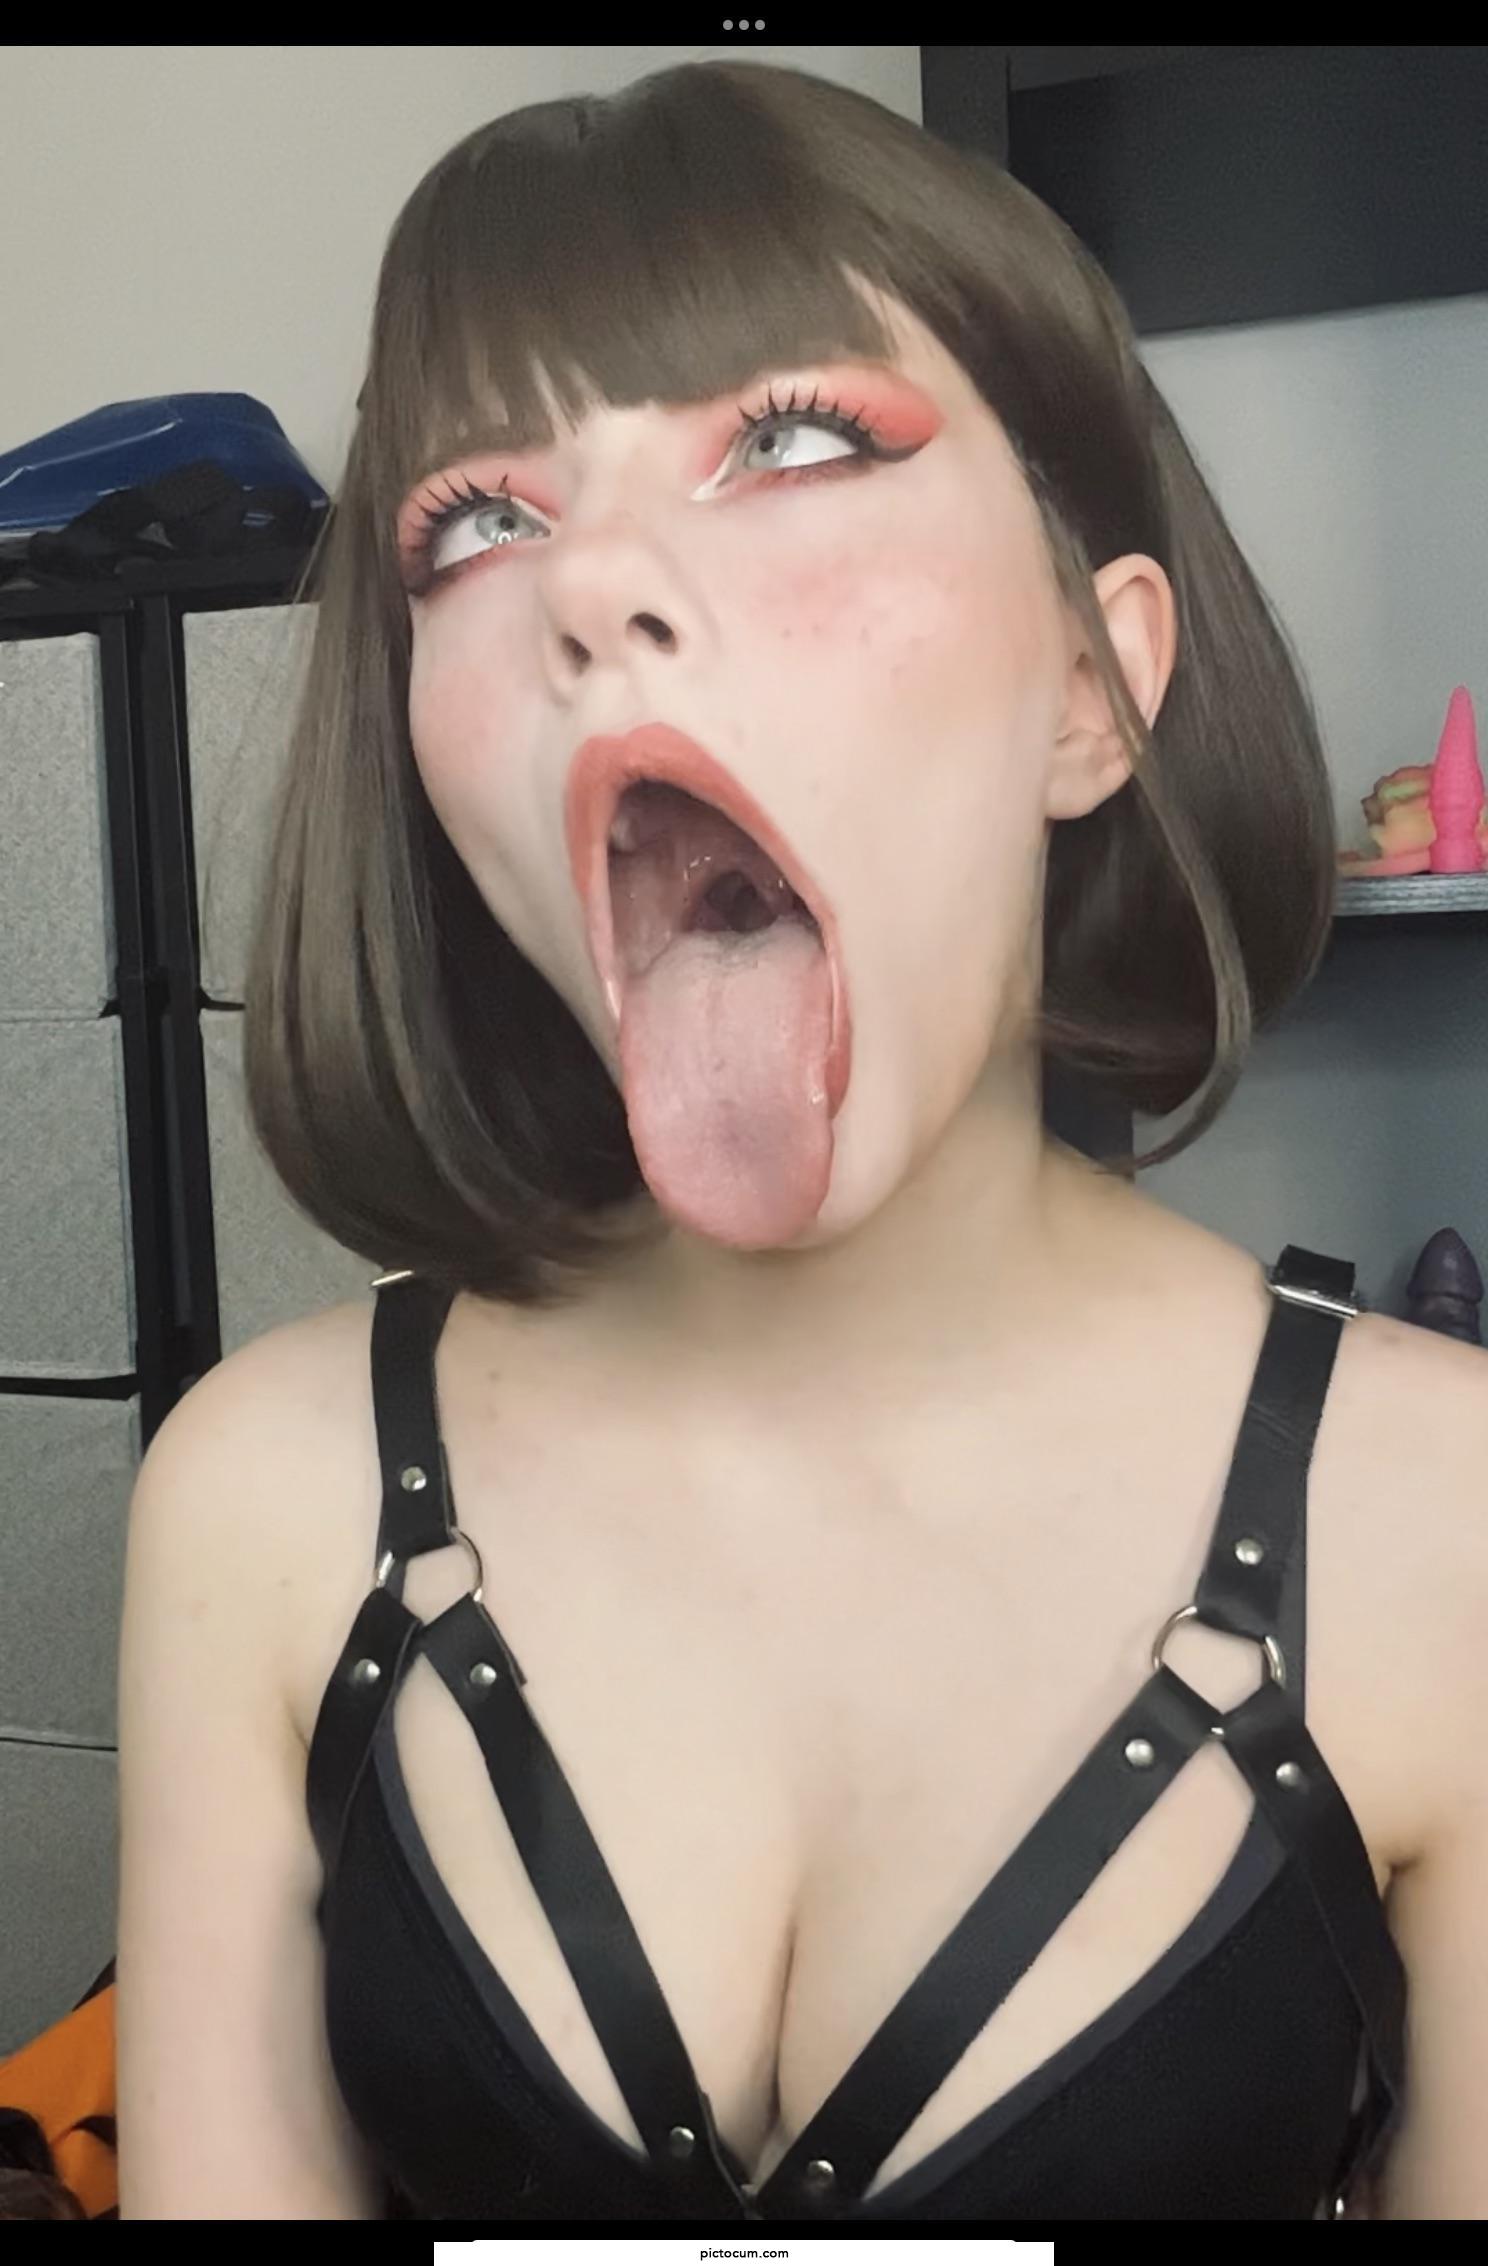 Fuck my mouth and fill my throat